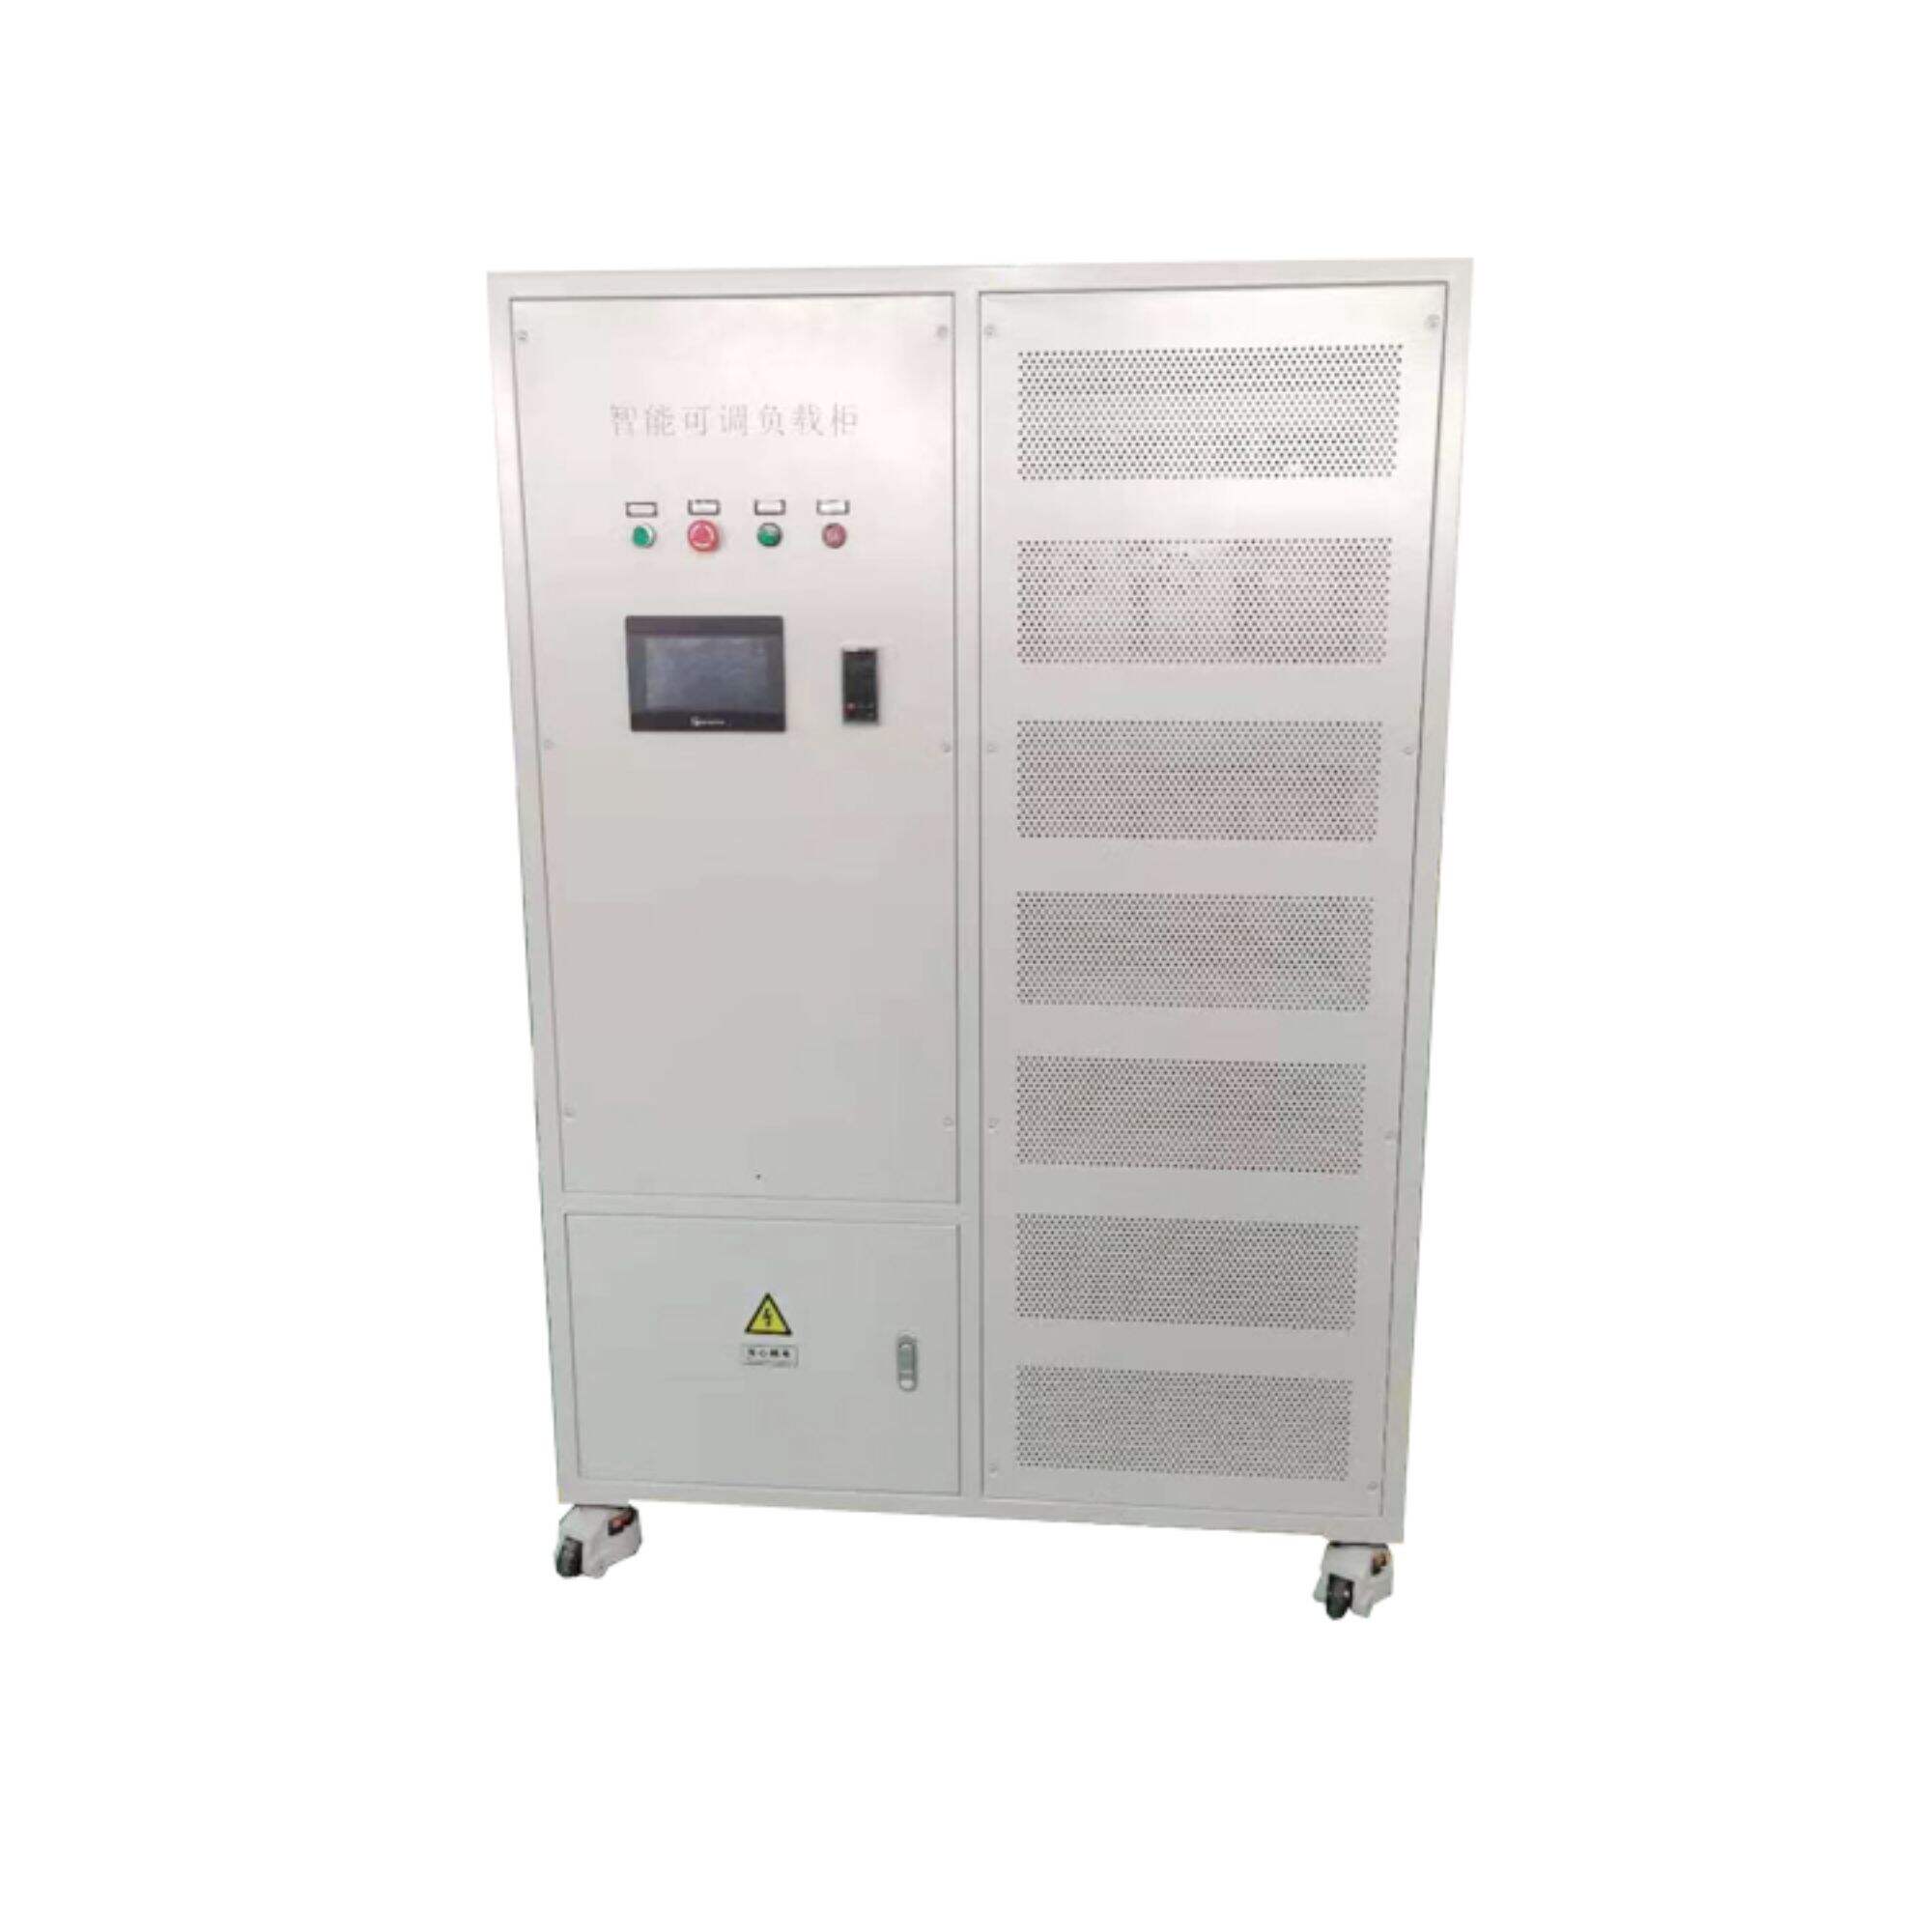 Low price and easy to use applicable petrochemical JH-RCL-60KWA380-P Adjustable dummy load bank